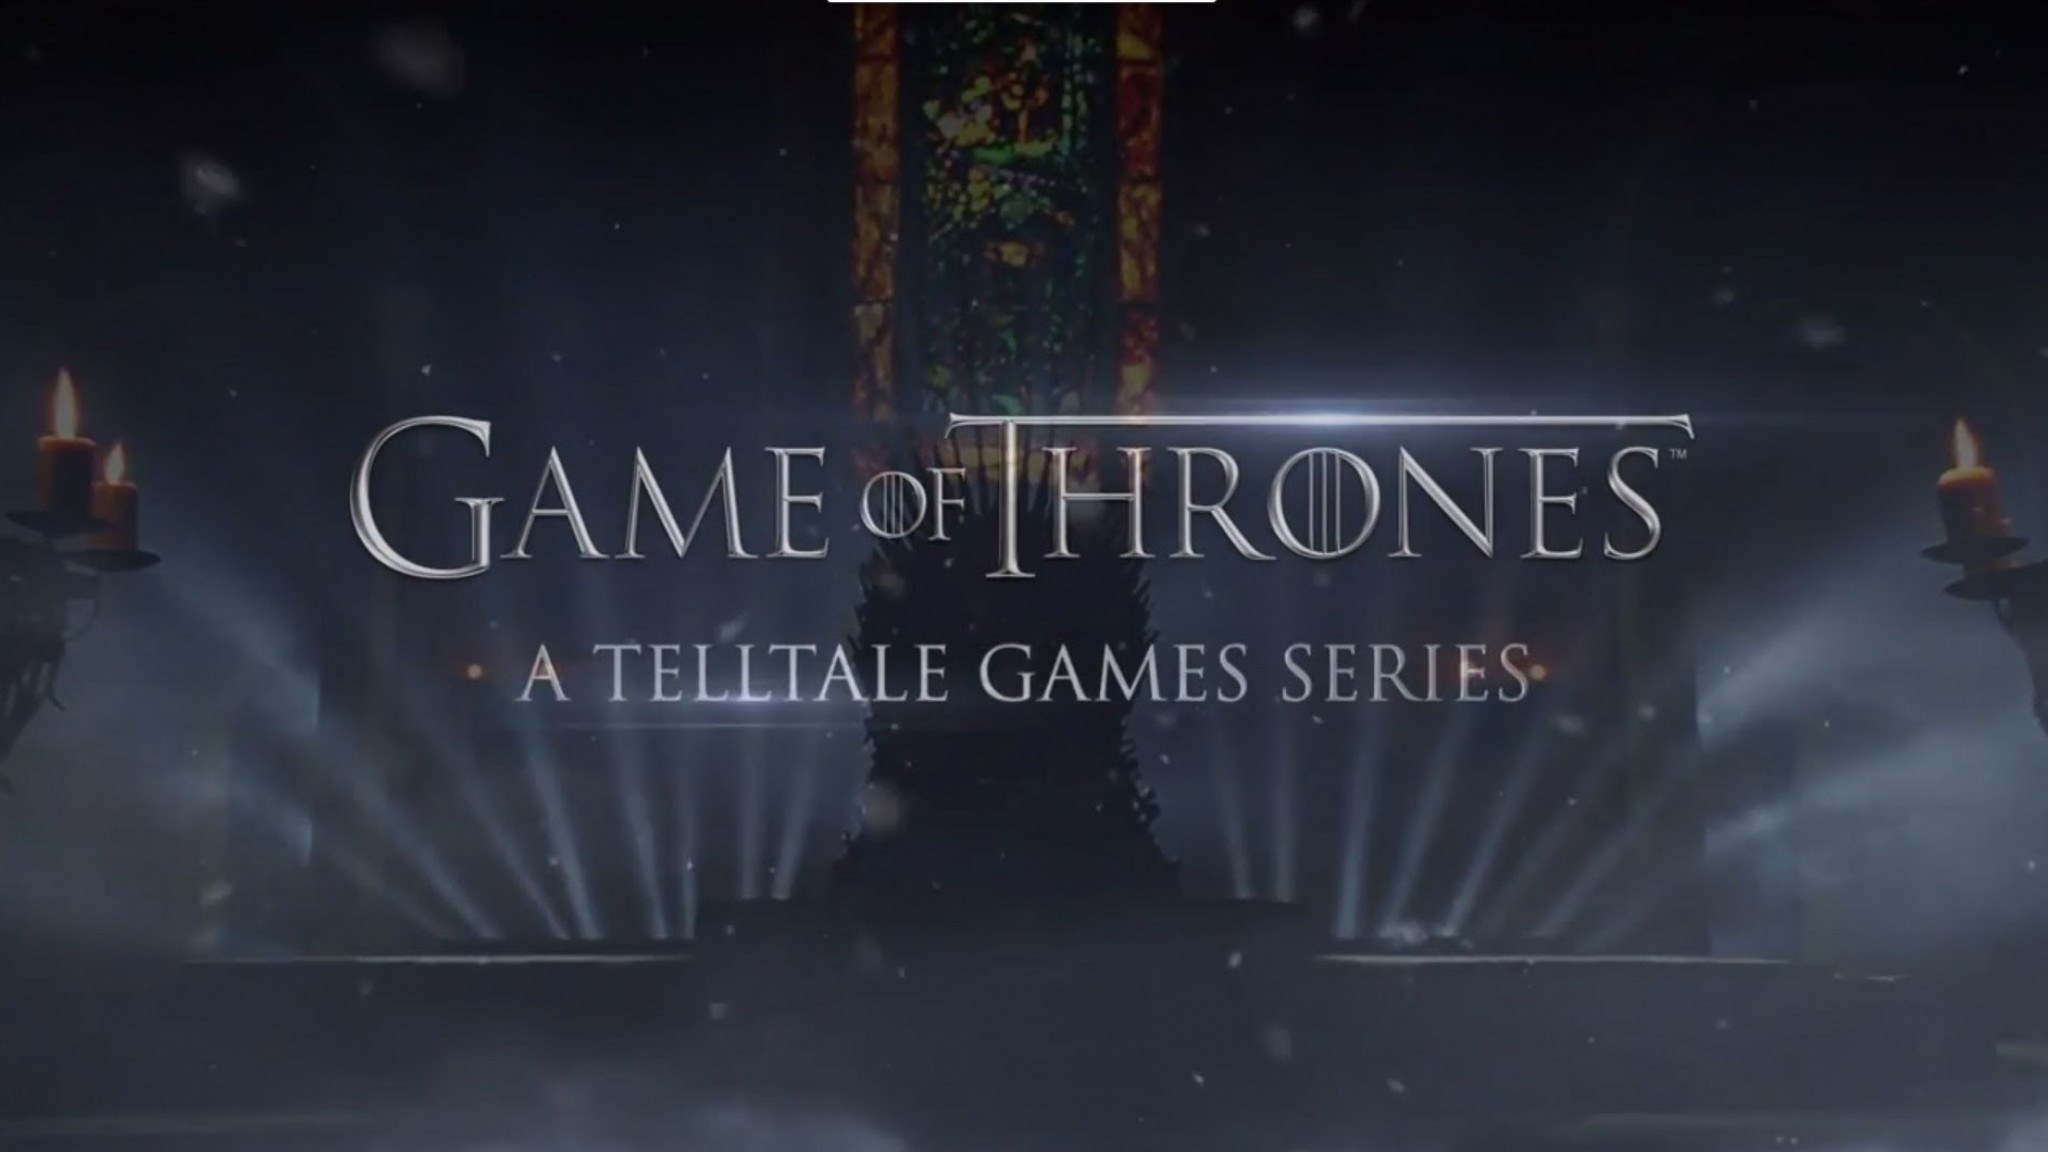 2048x1152  Wallpaper game of thrones a telltale games series, macos, mobile,  pc,